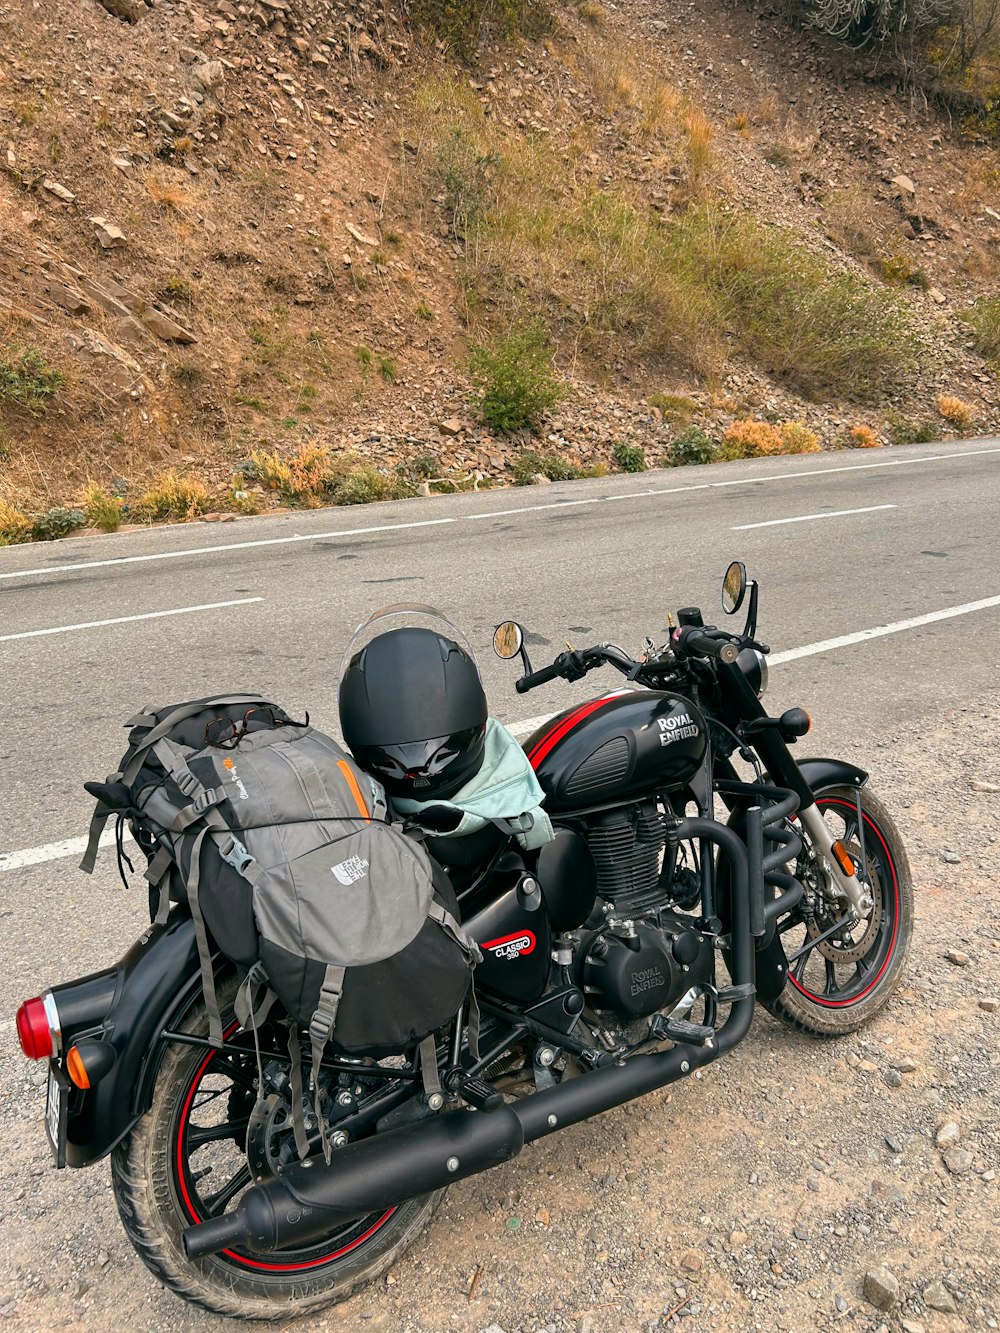 a motorcycle parked on the side of the road